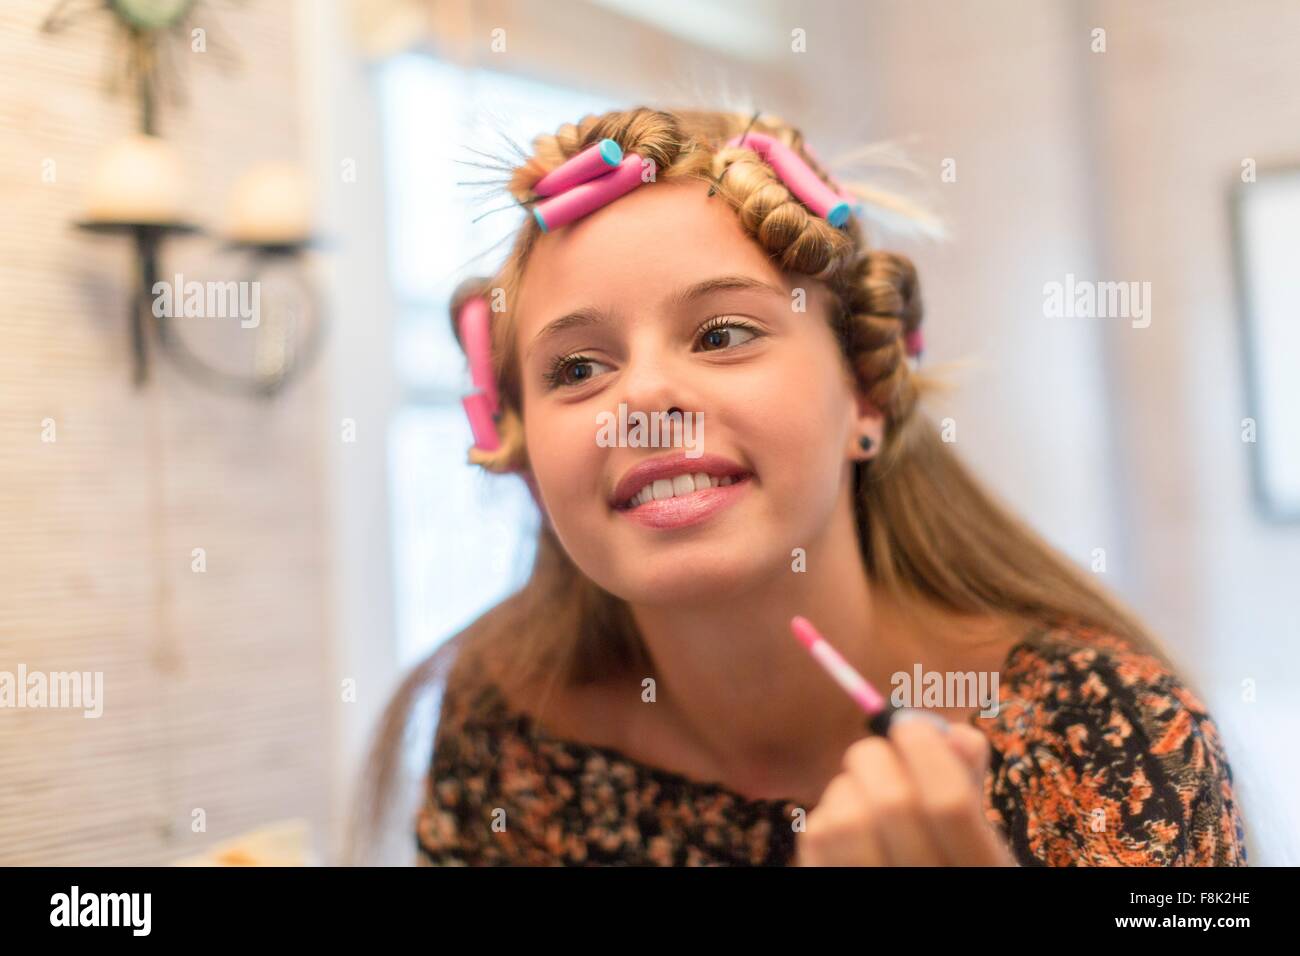 Teenager putting on make-up in bathroom Stock Photo